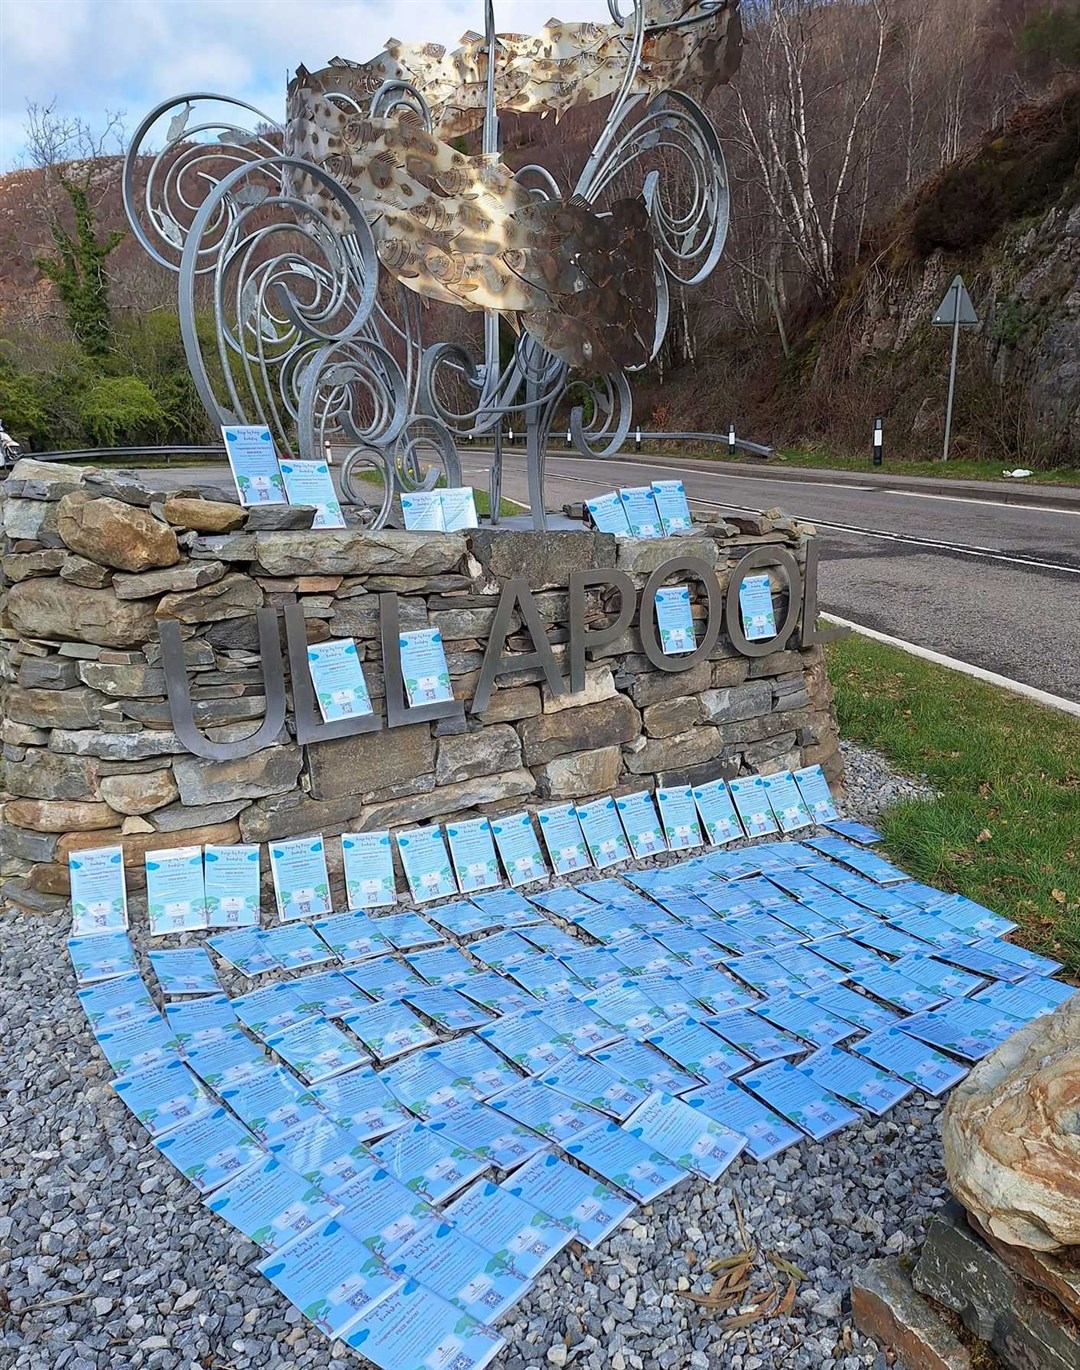 All the Paige by Paige books wrapped and ready to be hidden in and around Ullapool throughout the Easter holidays for the children to find, enjoy and rehide or share. Picture: Paige by Paige Bookshop.